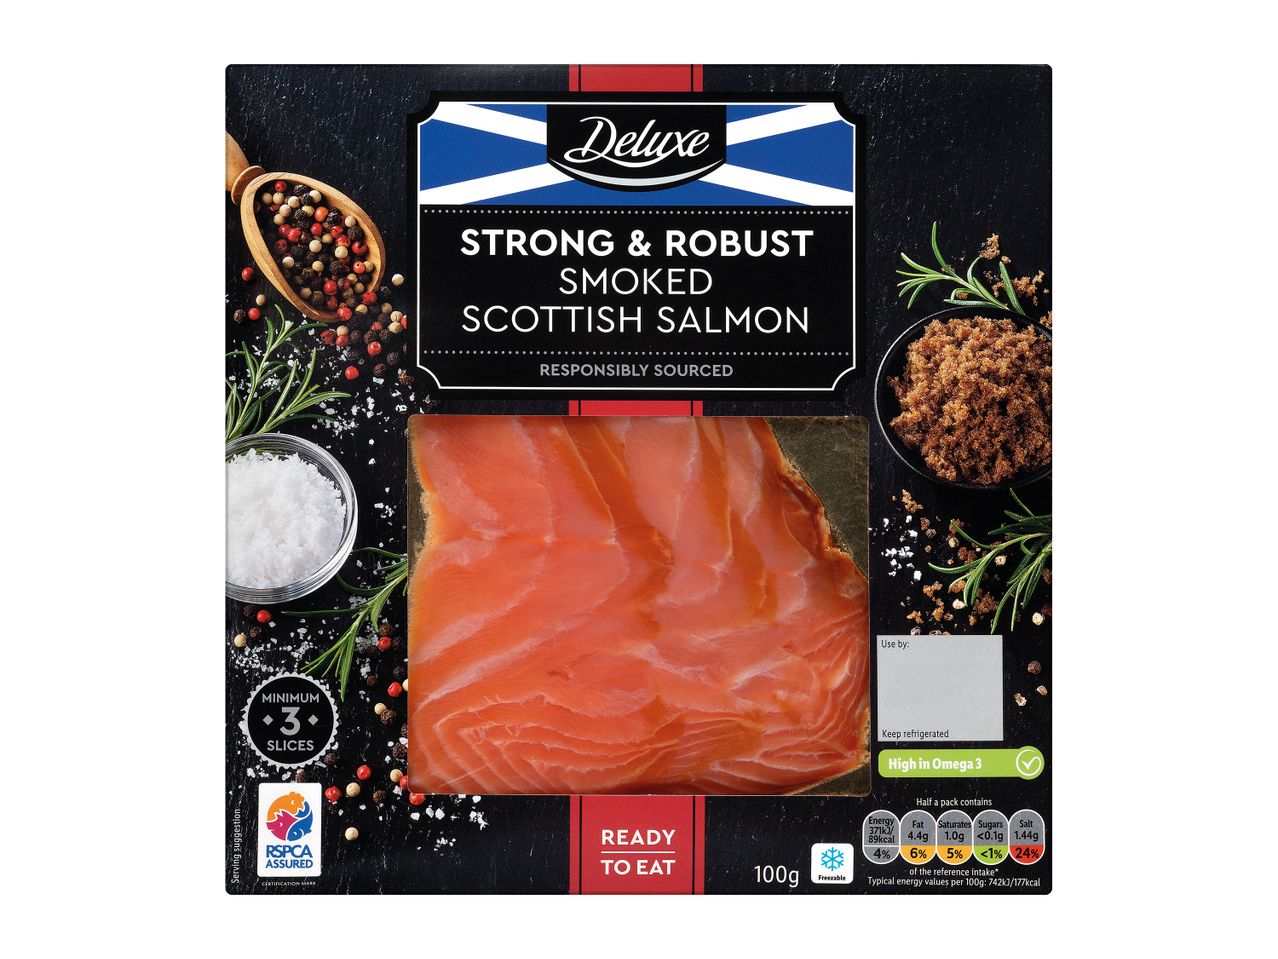 Go to full screen view: Deluxe Smoked Scottish Salmon - Image 1